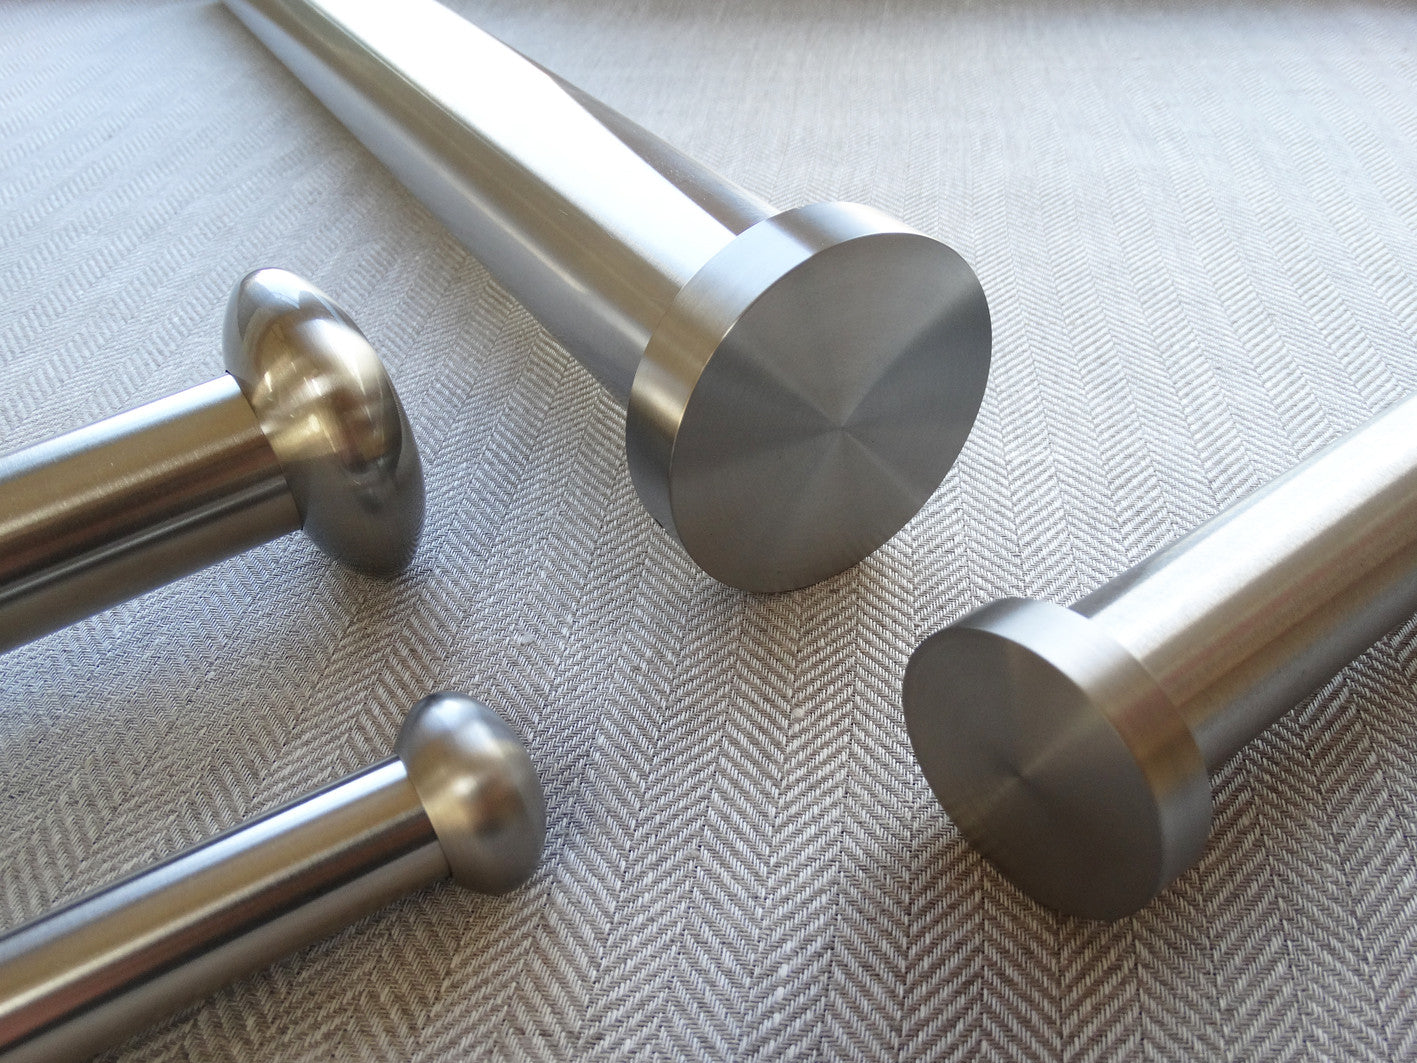 19mm diameter stainless steel metal curtain pole set with elliptical finials